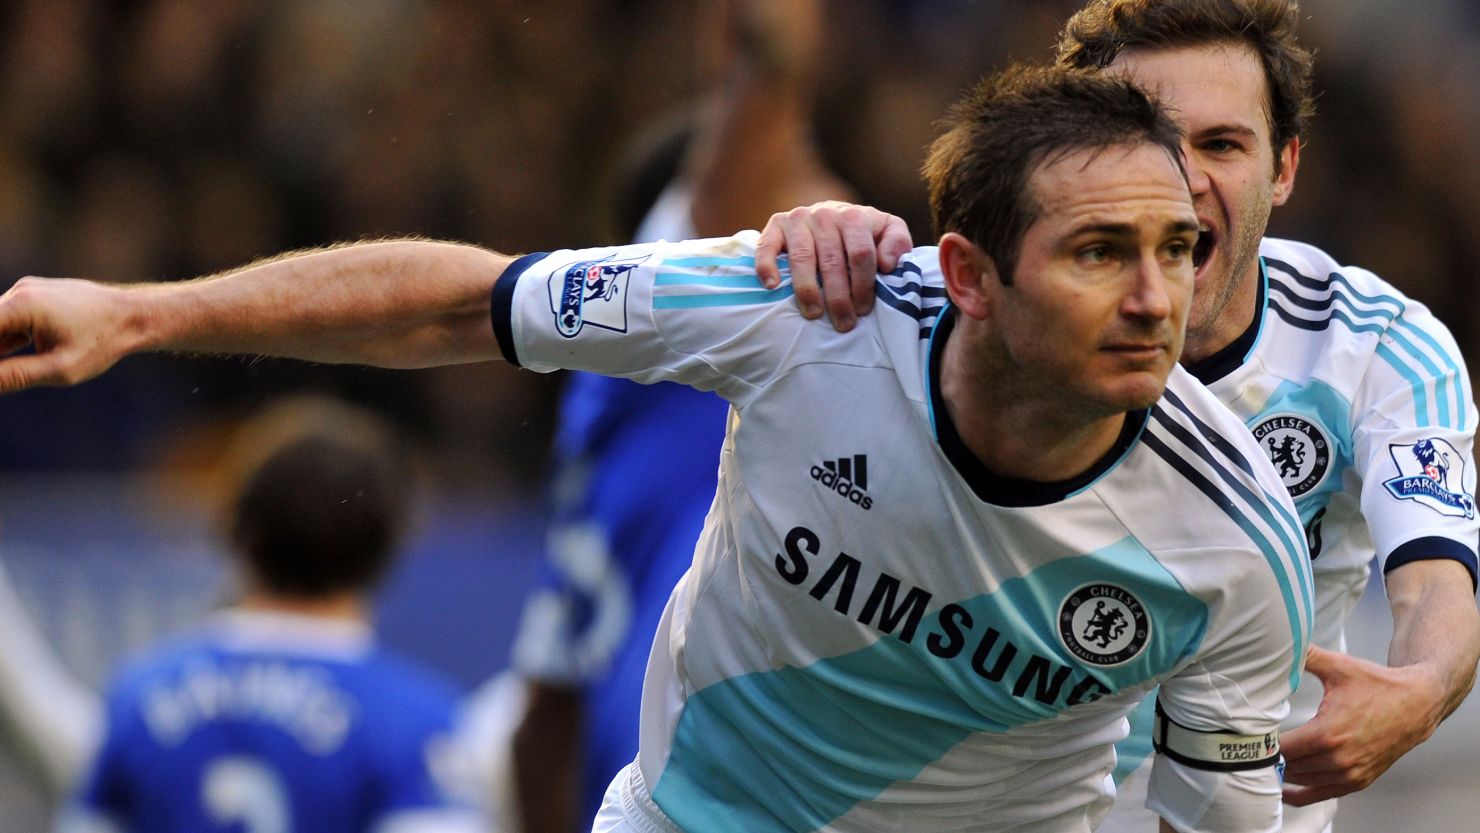 Frank Lampard is congratulated by Juan Mata after scoring Chelsea's second goal at Everton in a 2-1 win.